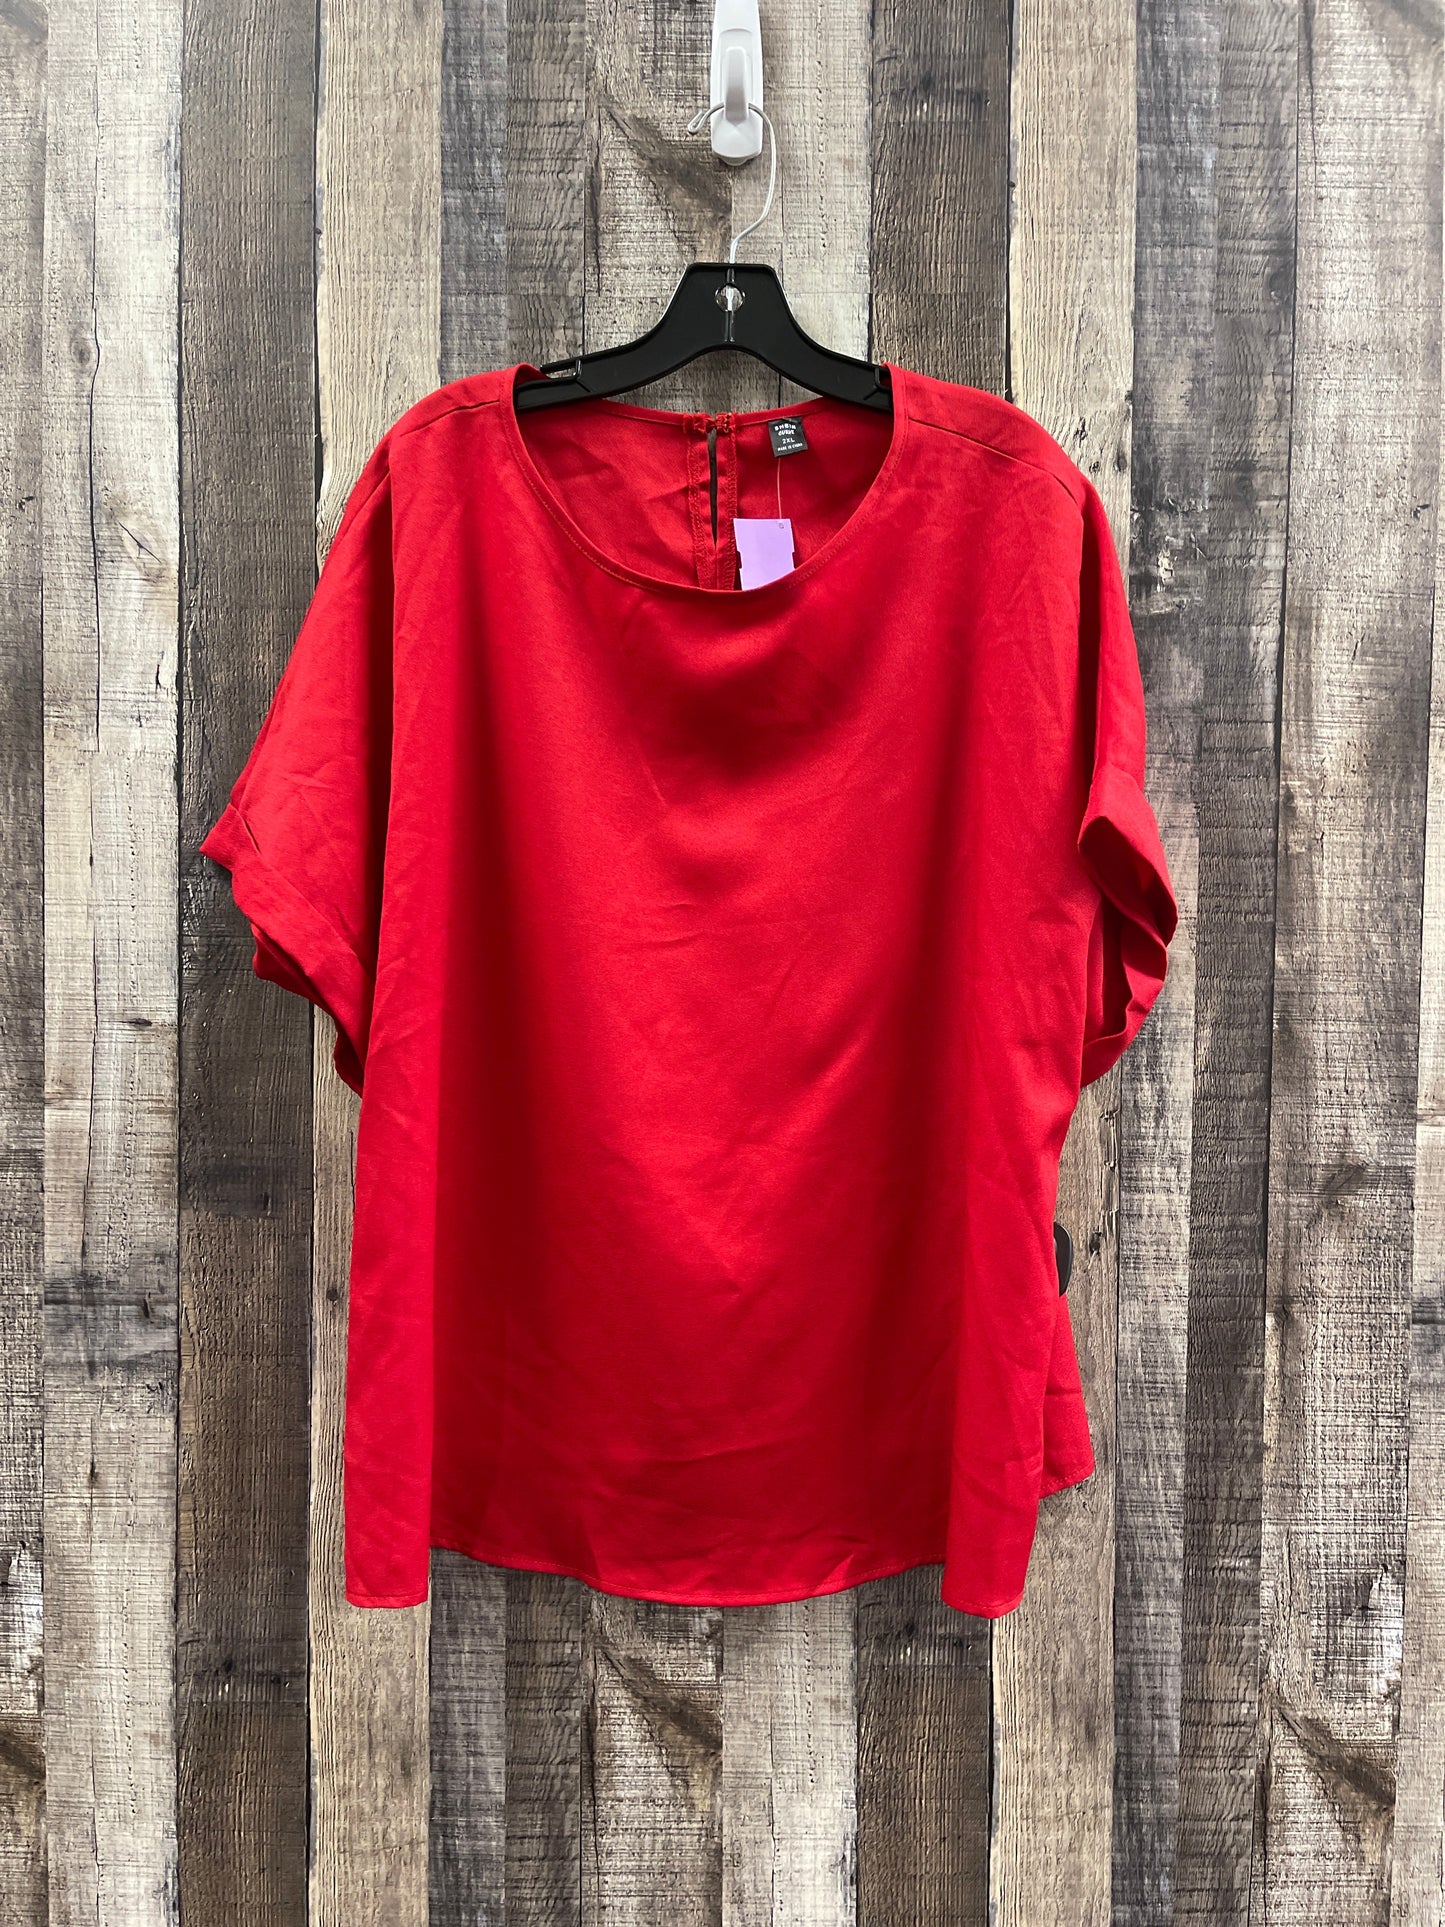 Red Blouse Short Sleeve Shein, Size 2x